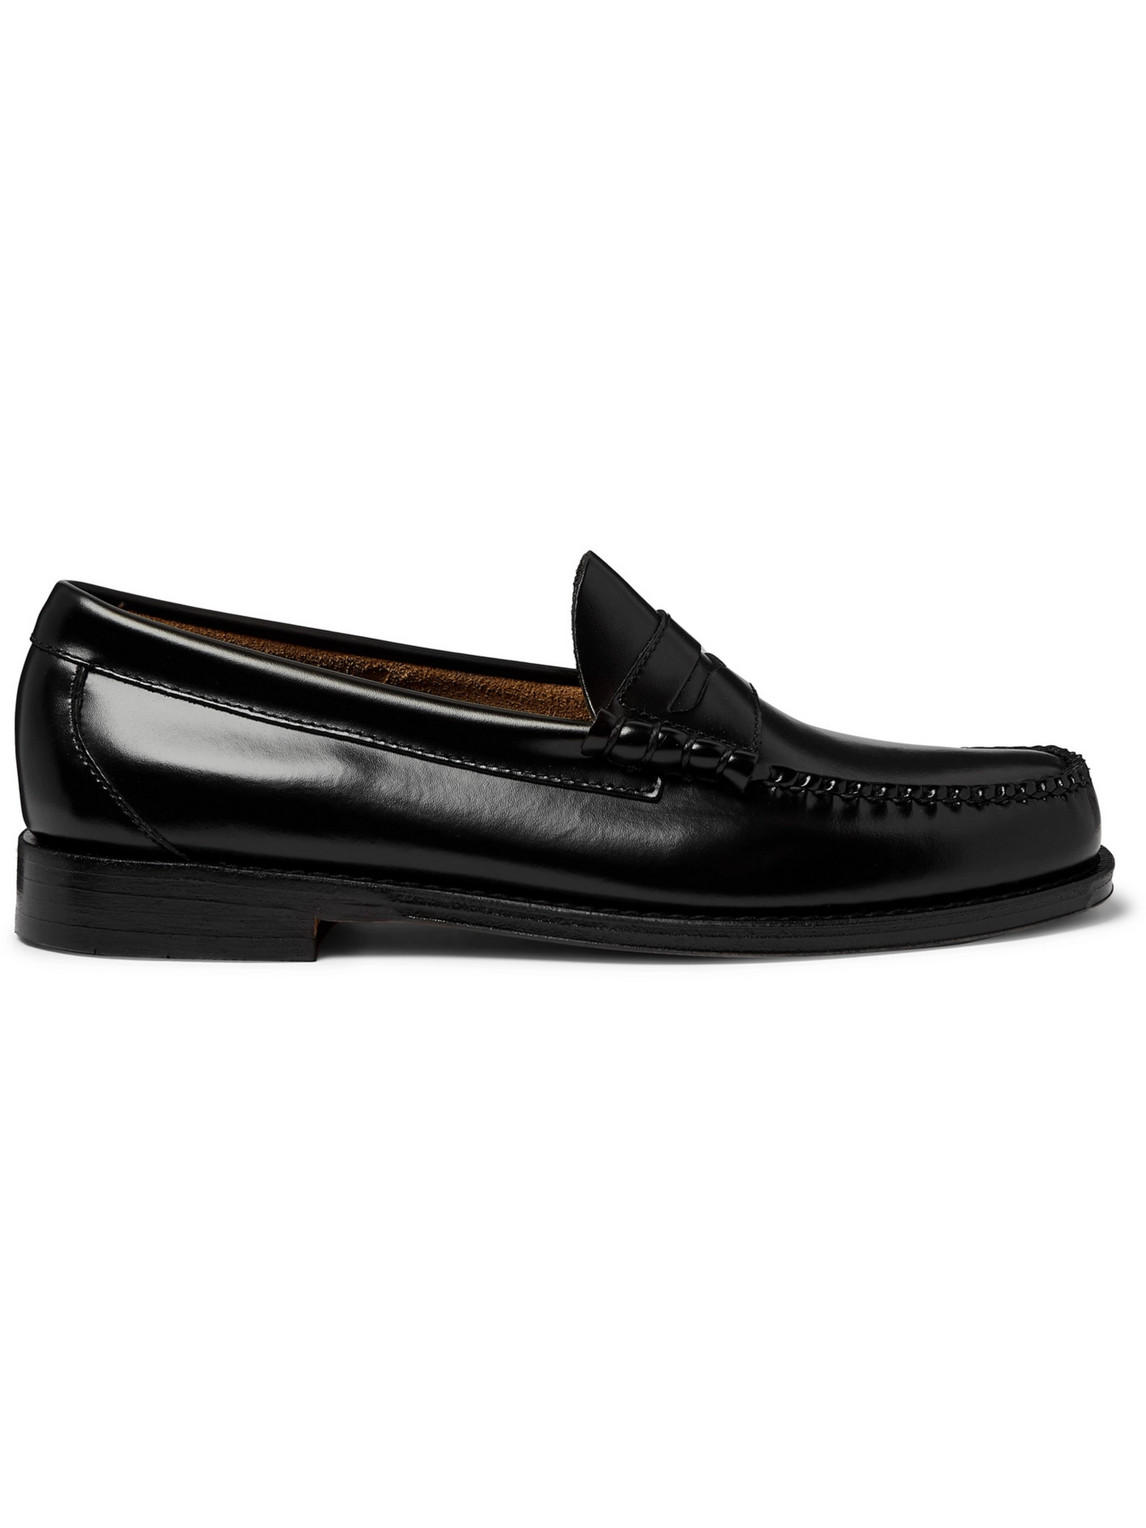 G.H. Bass & Co. - Weejuns Heritage Larson Leather Penny Loafers - Men - Black - UK 12 von G.H. Bass & Co.